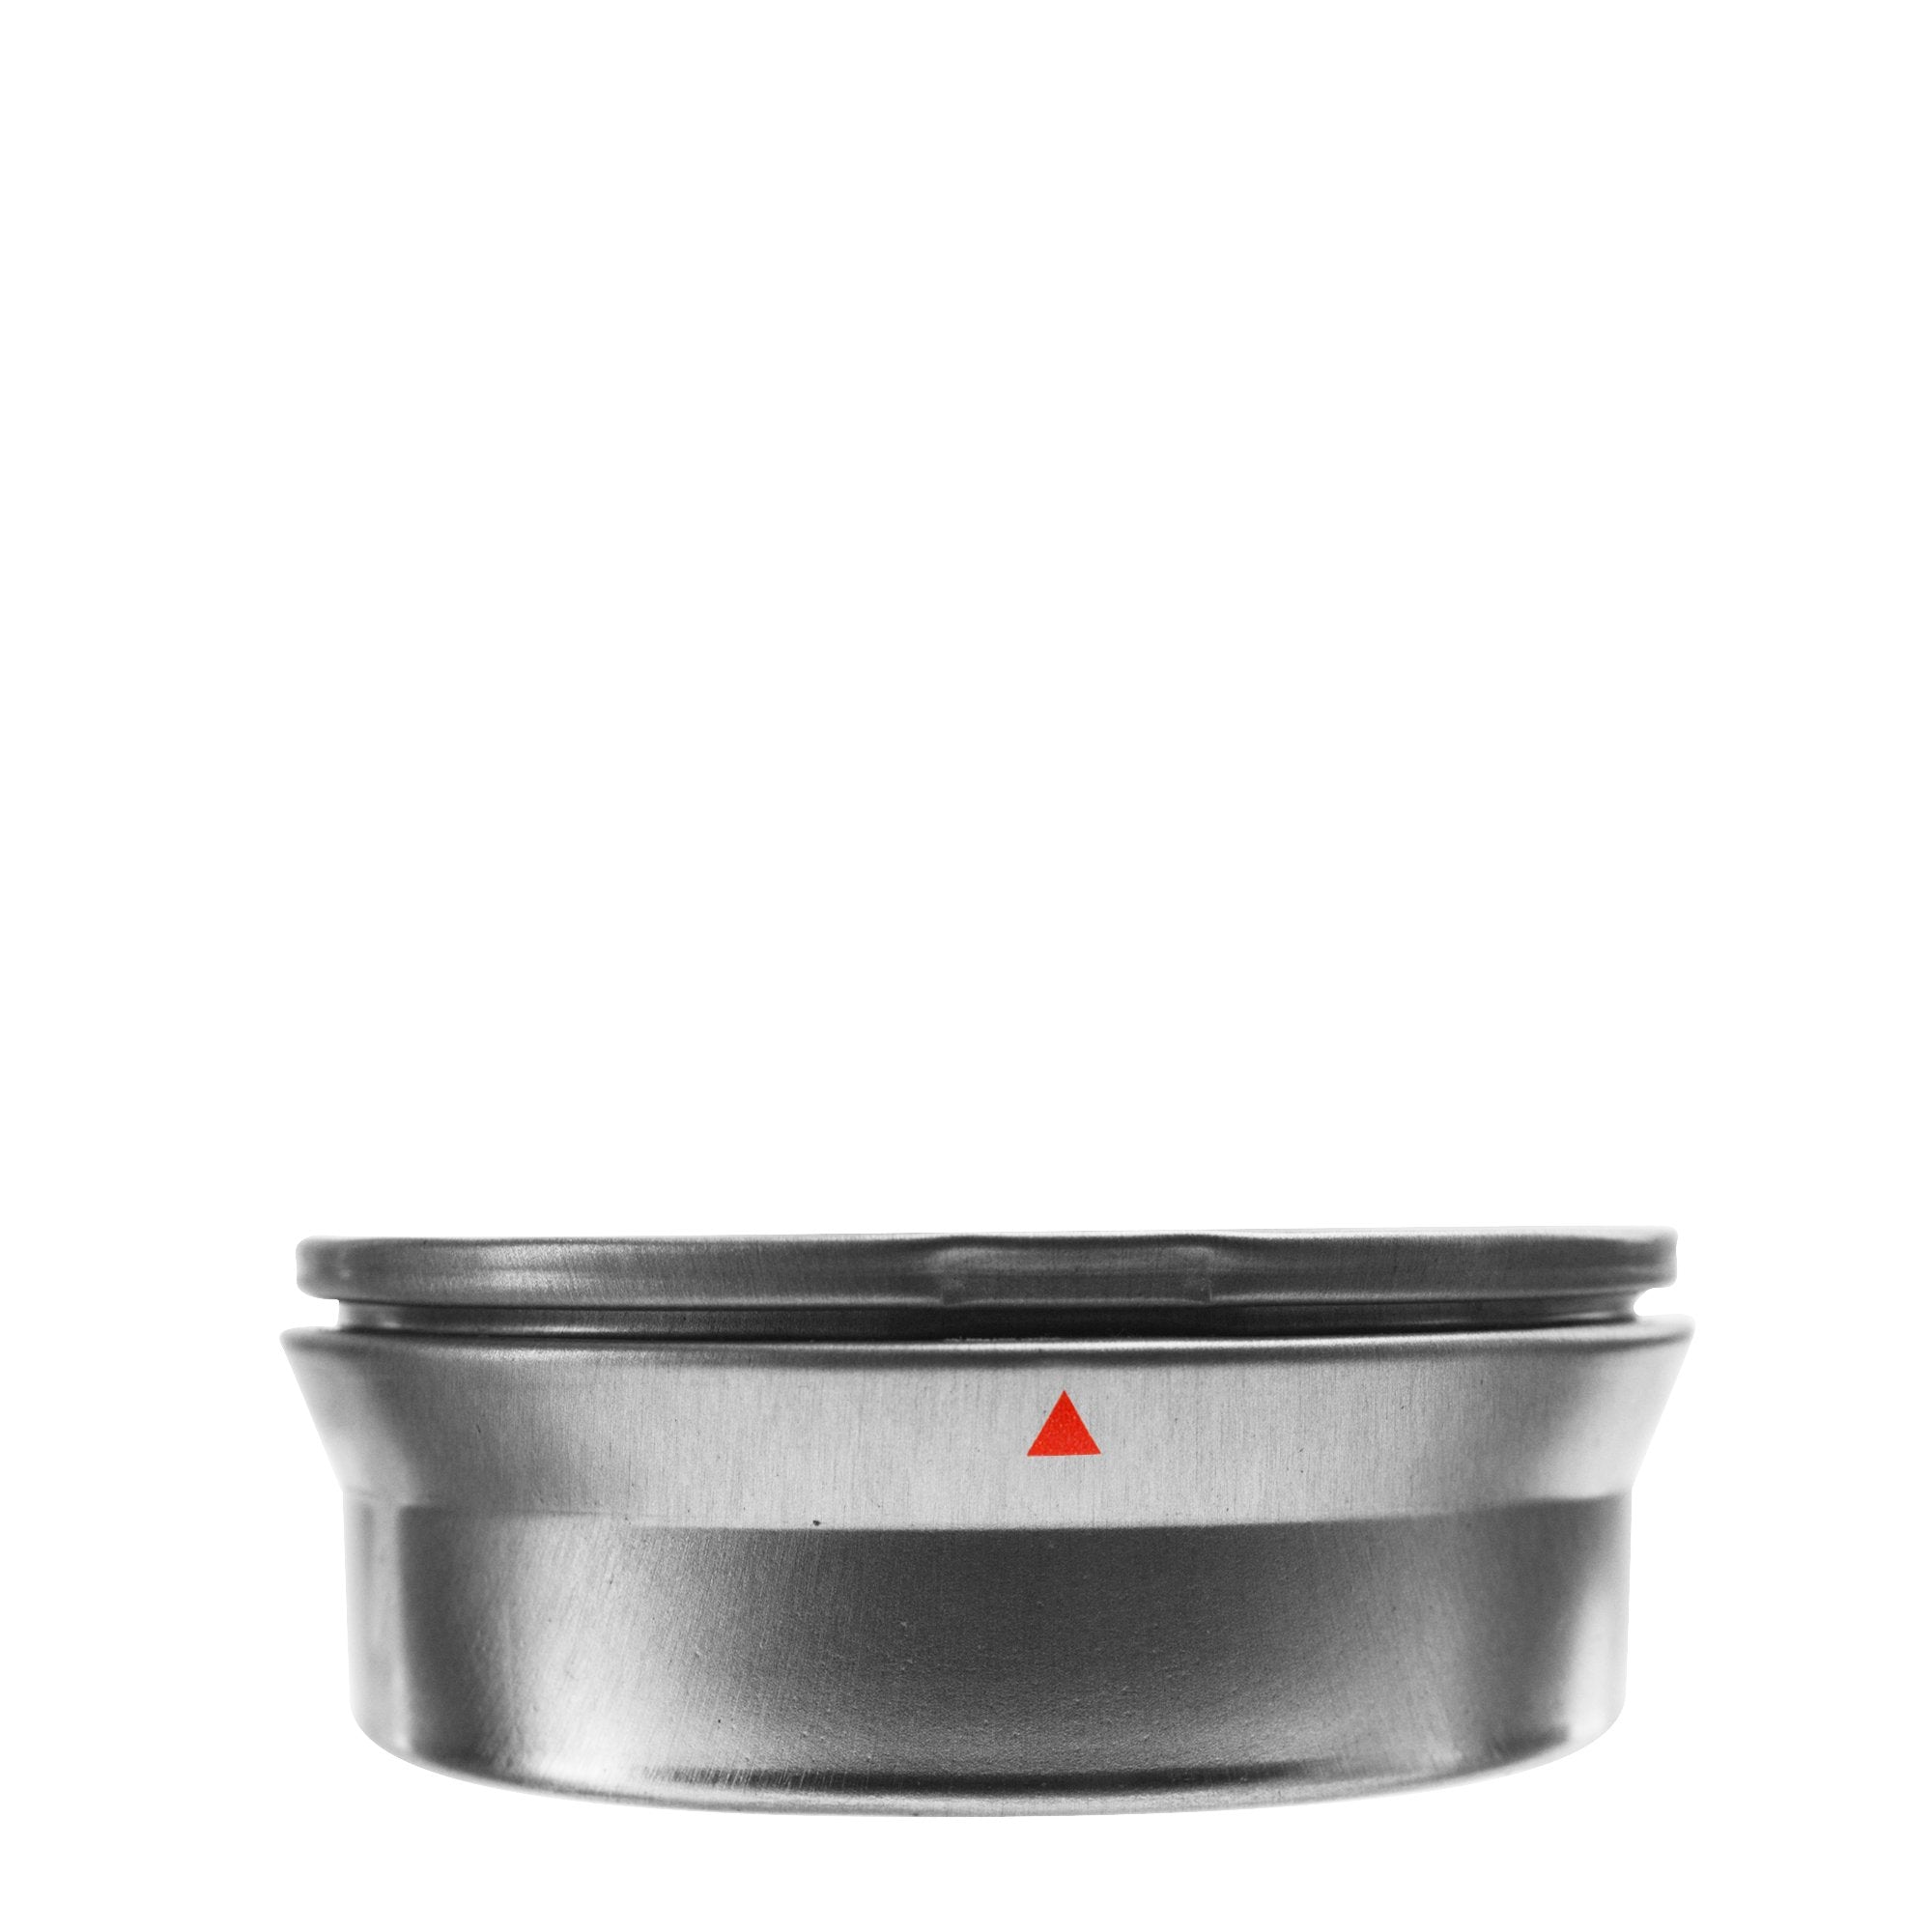 Child Resistant | Custom Safely Lock Sentinel Tin with Cap | Small and Medium - Brushed Metal - 4